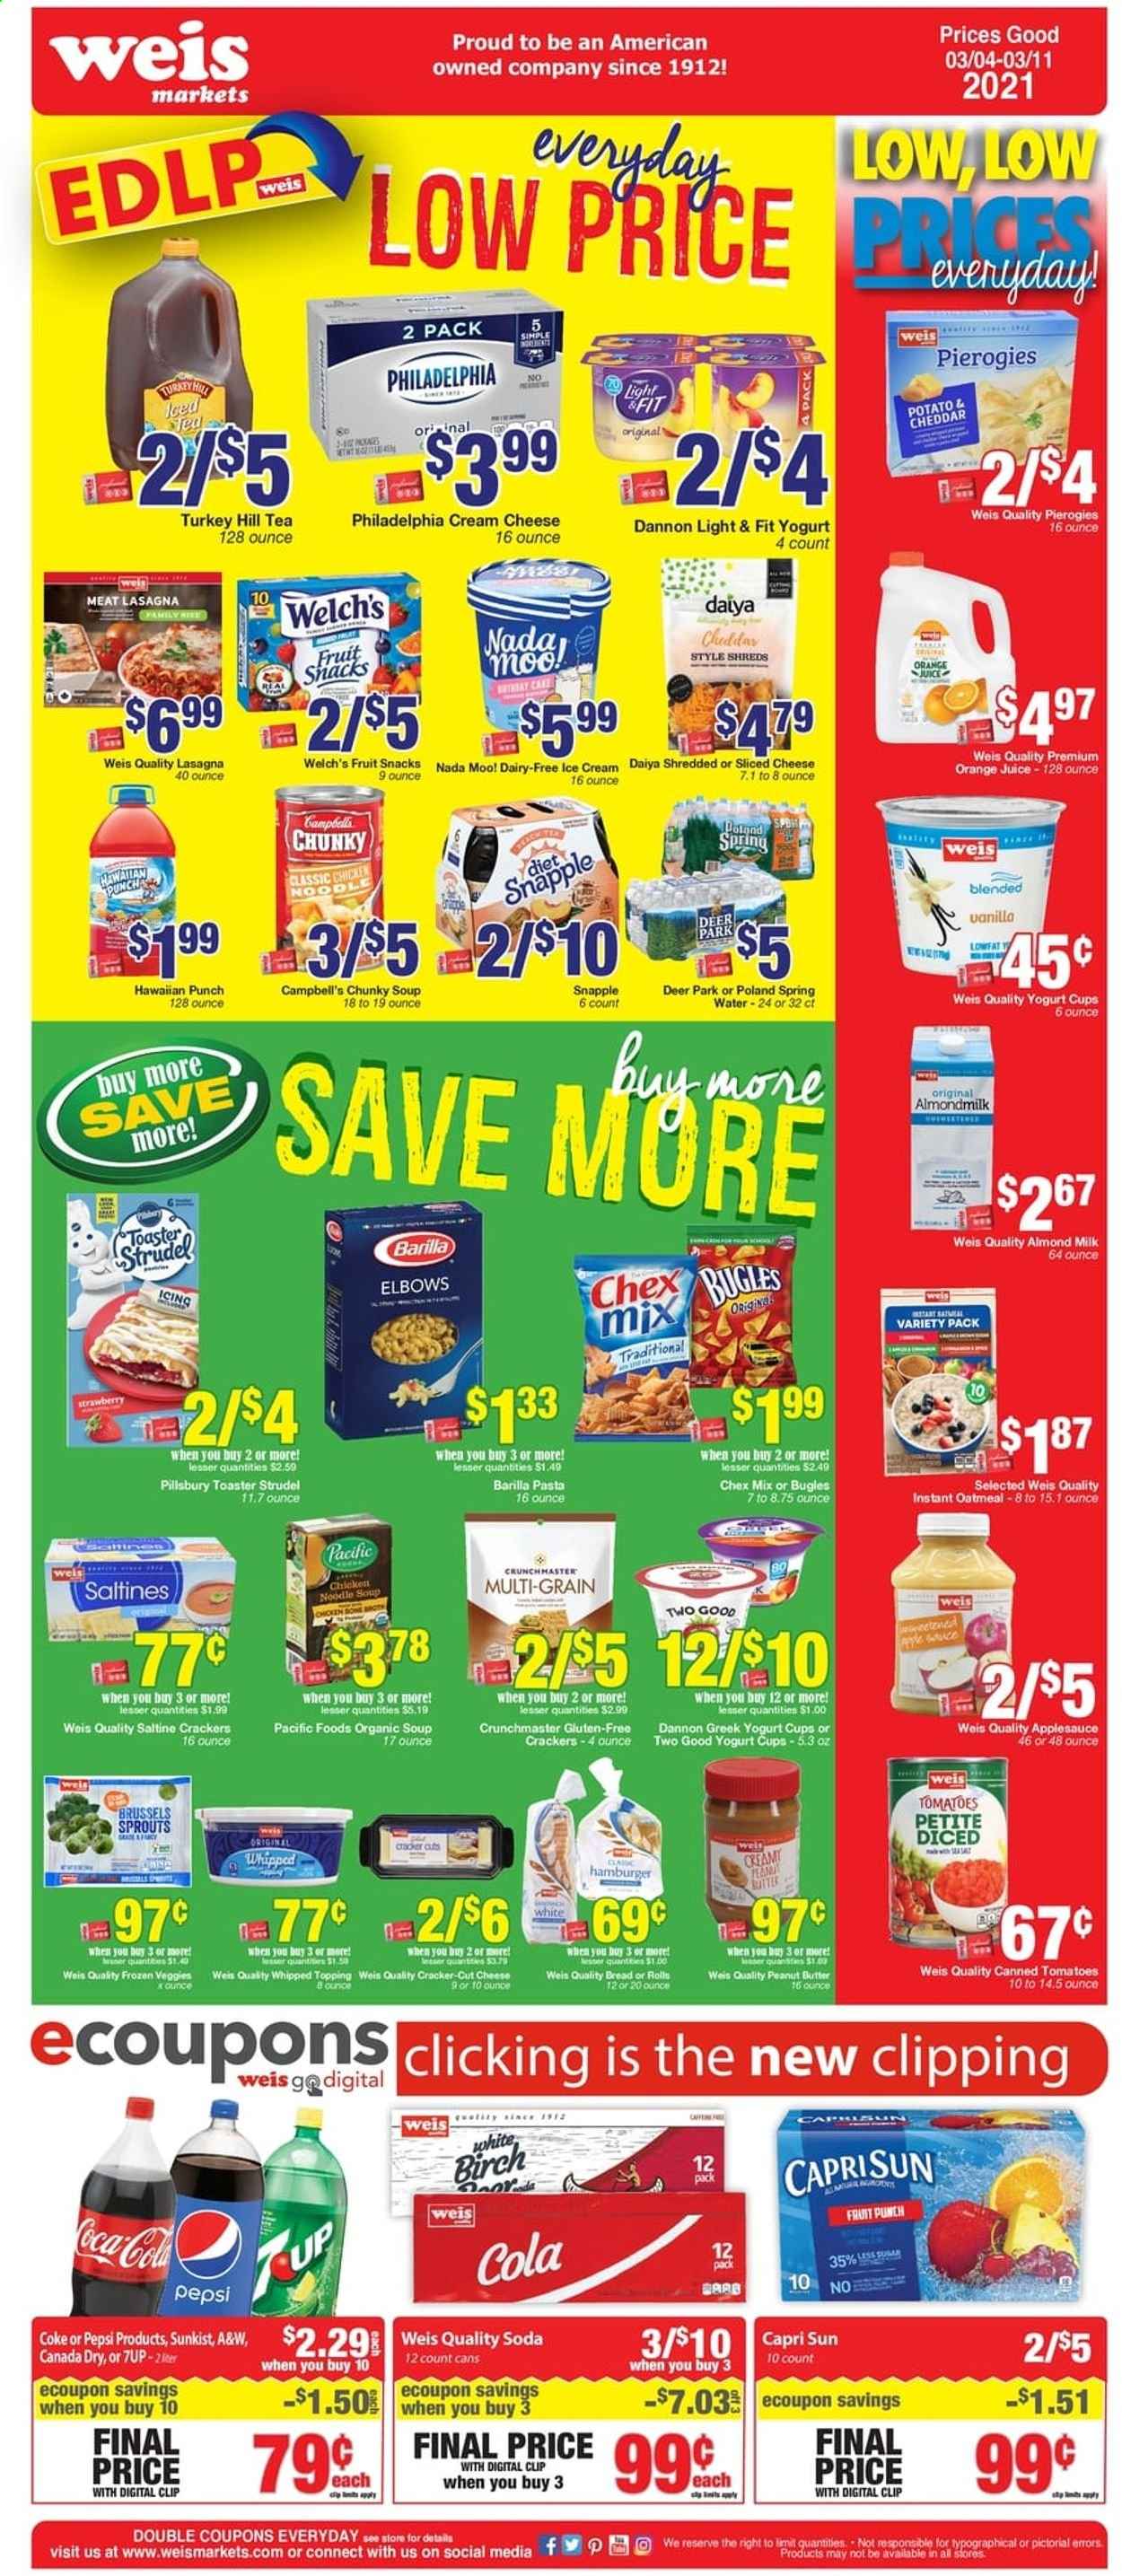 thumbnail - Weis Flyer - 03/04/2021 - 03/11/2021 - Sales products - bread, cake, strudel, hamburger, Campbell's, cream cheese, soup, Pillsbury, Barilla, lasagna meal, Welch's, sliced cheese, Philadelphia, cheese, greek yoghurt, yoghurt, Dannon, almond milk, ice cream, brussel sprouts, crackers, fruit snack, Chex Mix, oatmeal, topping, pasta, noodles, apple sauce, peanut butter, Canada Dry, Capri Sun, Coca-Cola, Pepsi, orange juice, soda, juice, 7UP, Snapple, A&W, spring water, tea. Page 3.